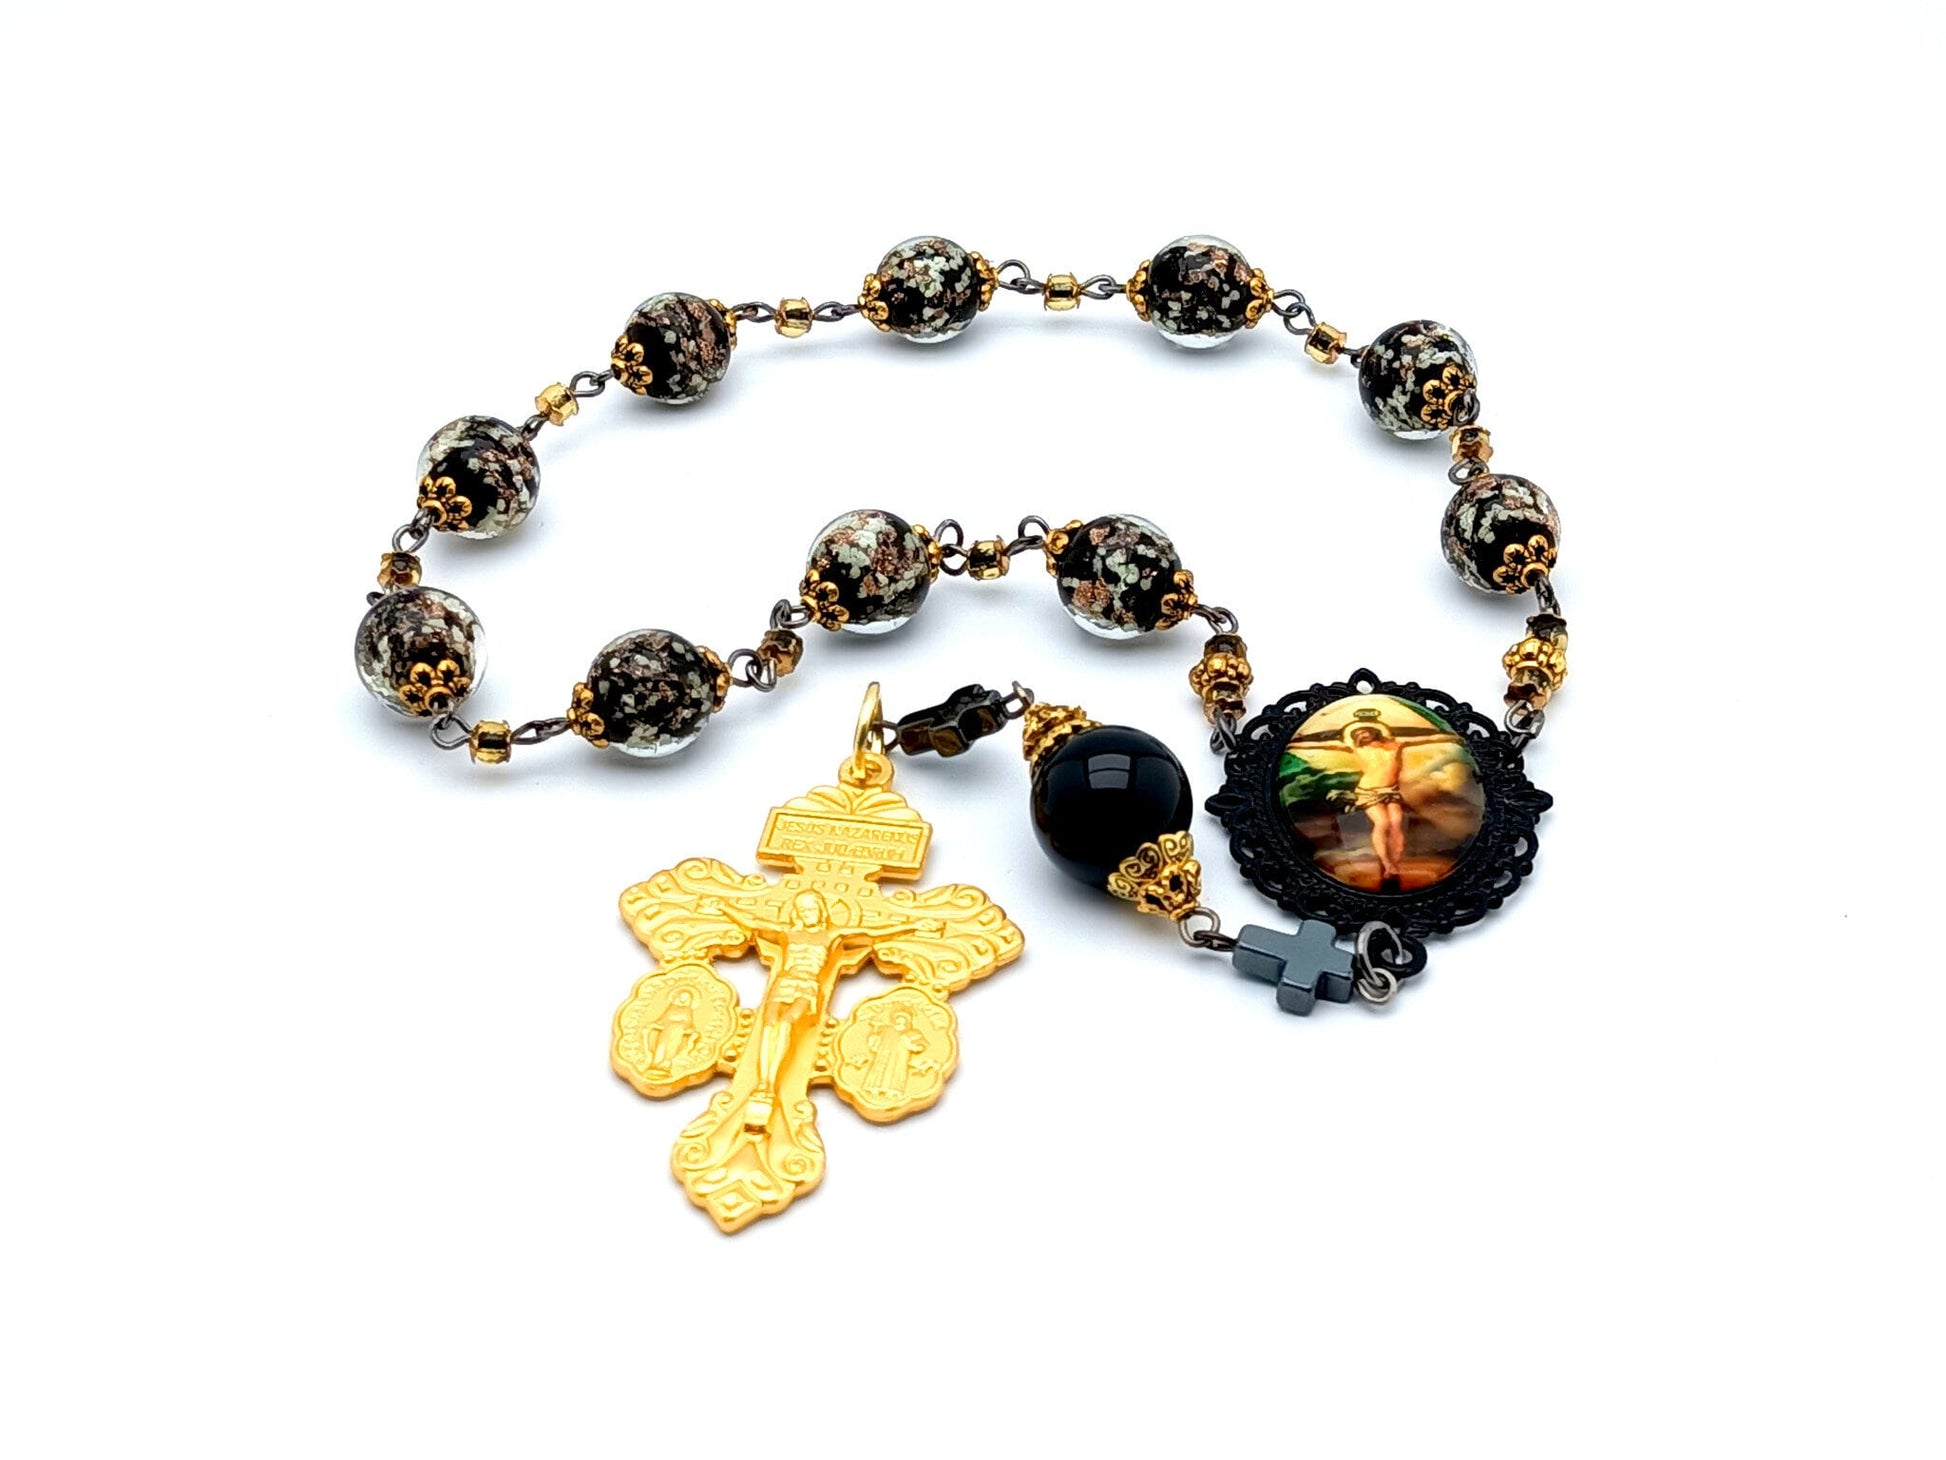 Crucifixion unique rosary beads single decade rosary with black and gold glow in the dark glass beads, golden pardon crucifix and picture centre medal.